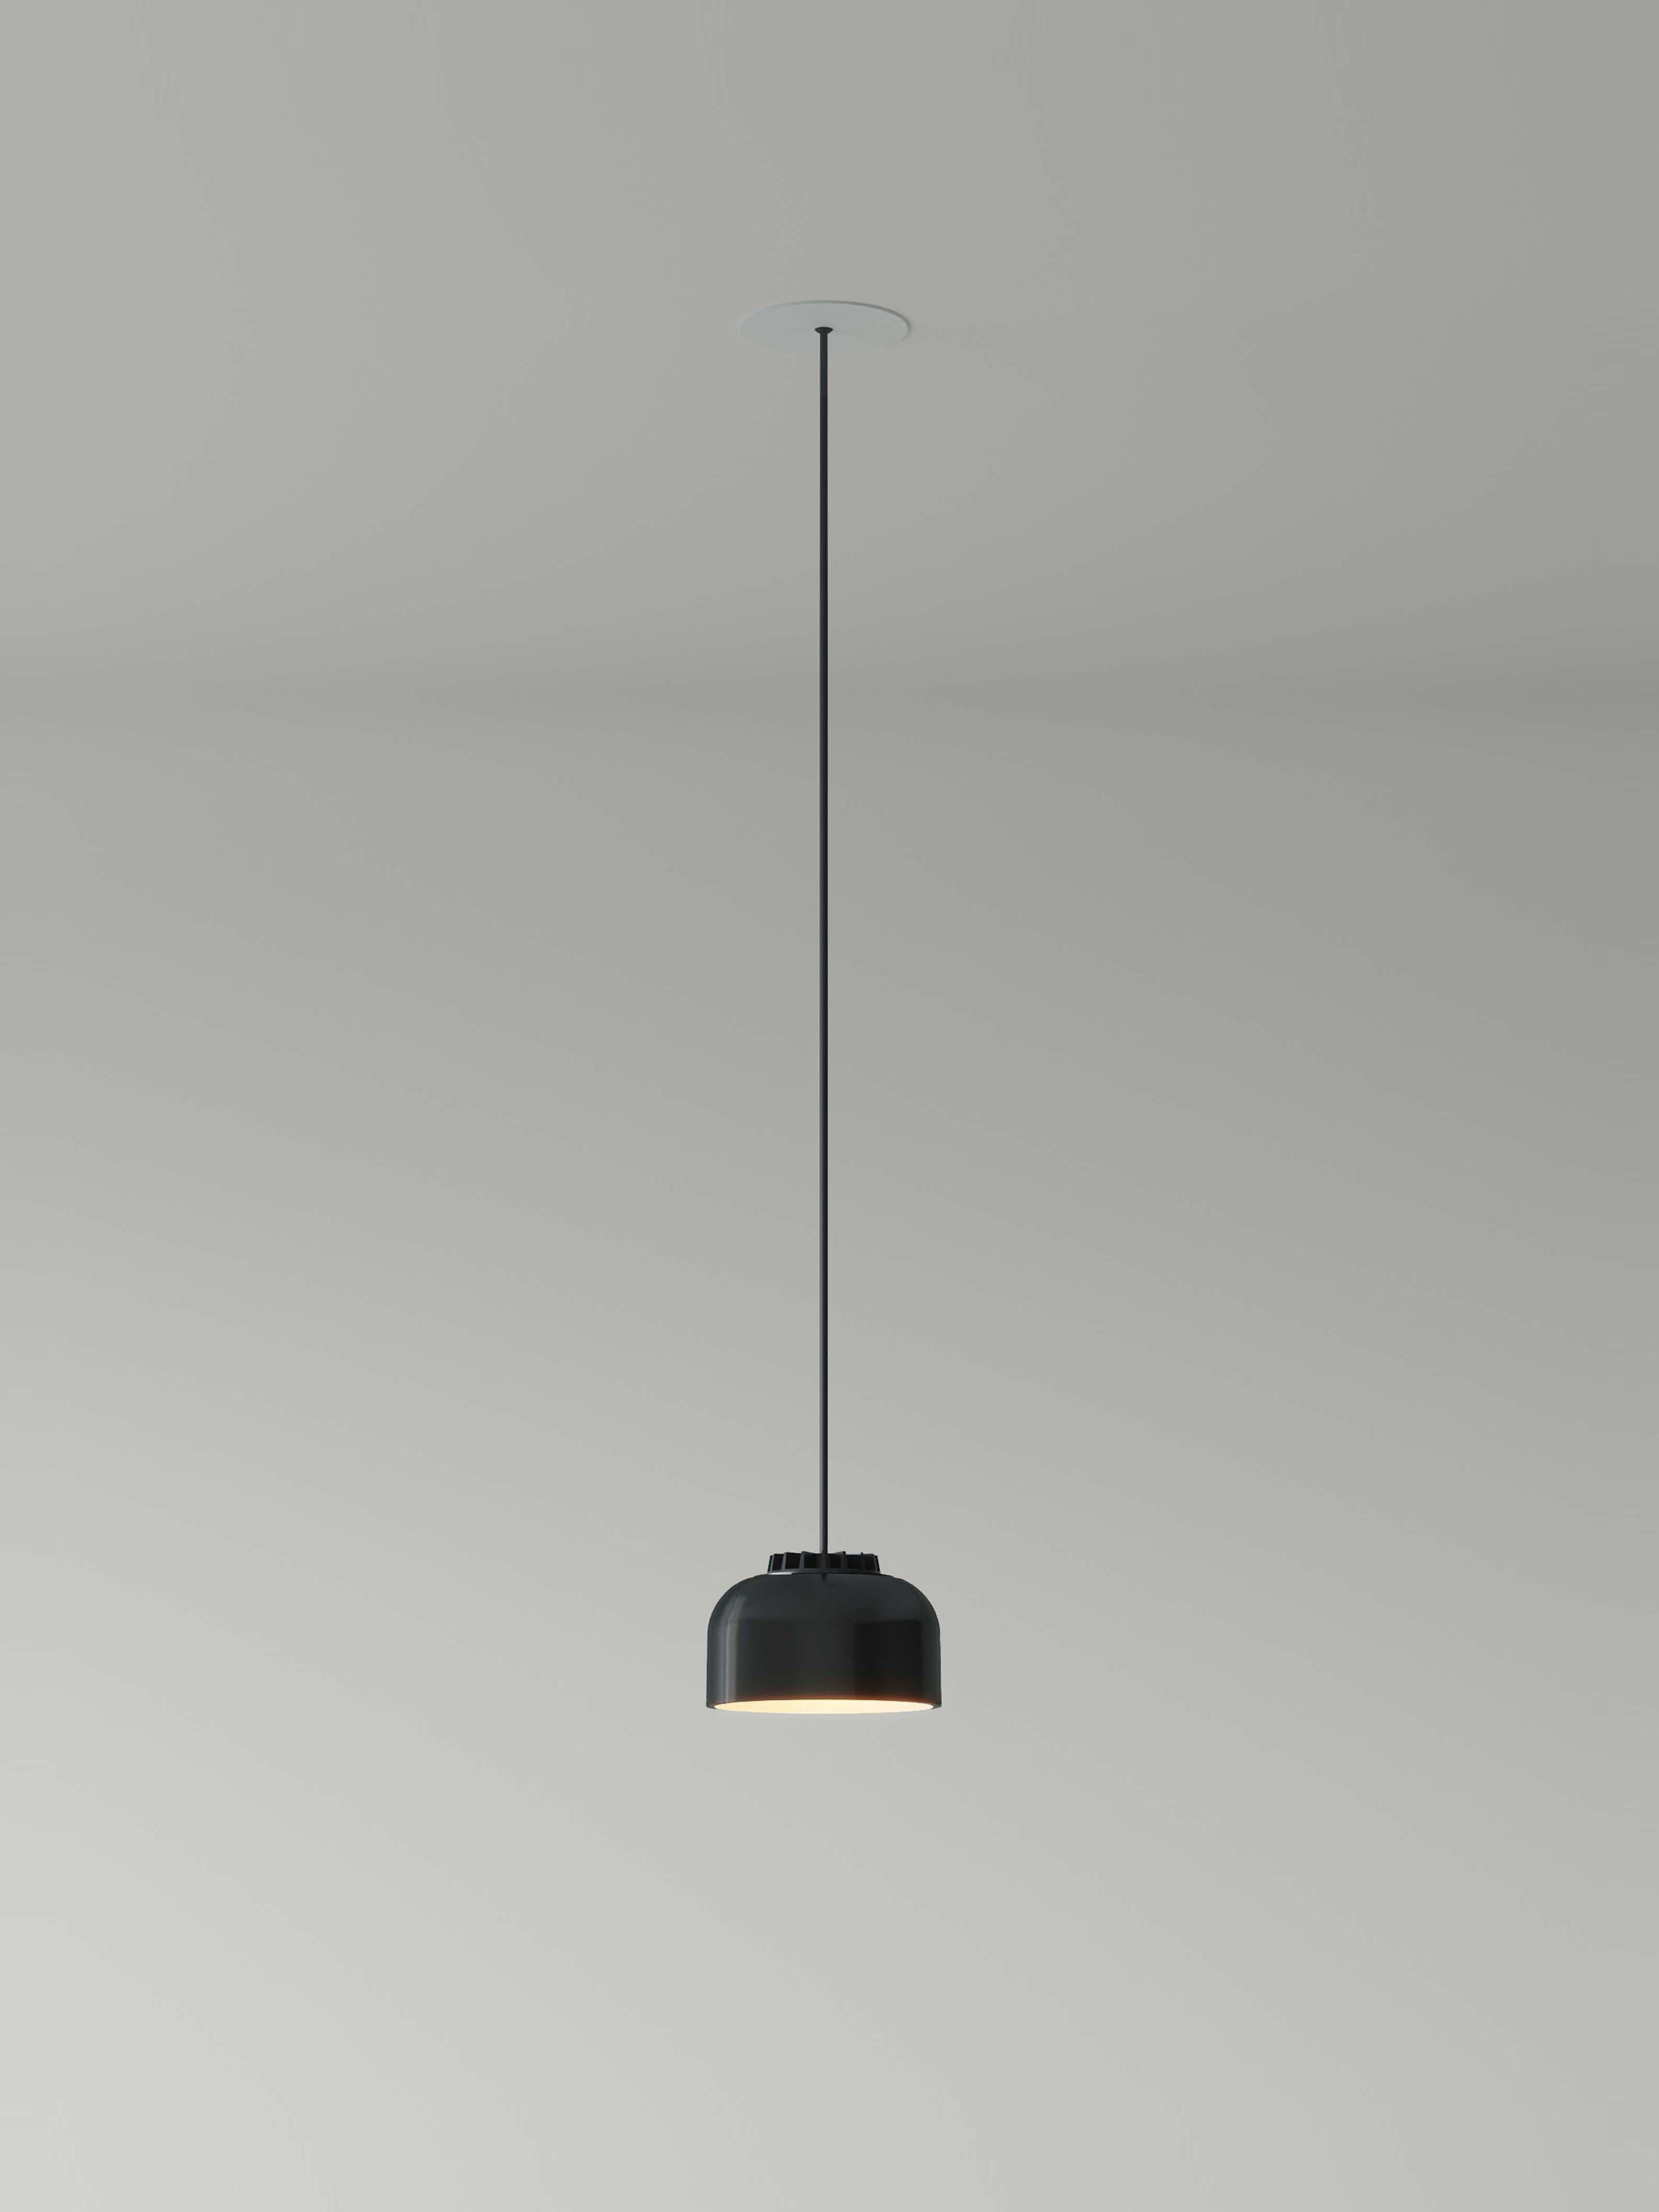 Small black headHat bowl pendant lamp by Santa & Cole
Dimensions: D 14 x H 9 cm
Materials: Metal, ceramic.
Cable lenght: 3mts.
Available in white or black ceramic. Available in 2 cable lengths: 3mts, 8mts.
Availalble in 2 canopy colors: black